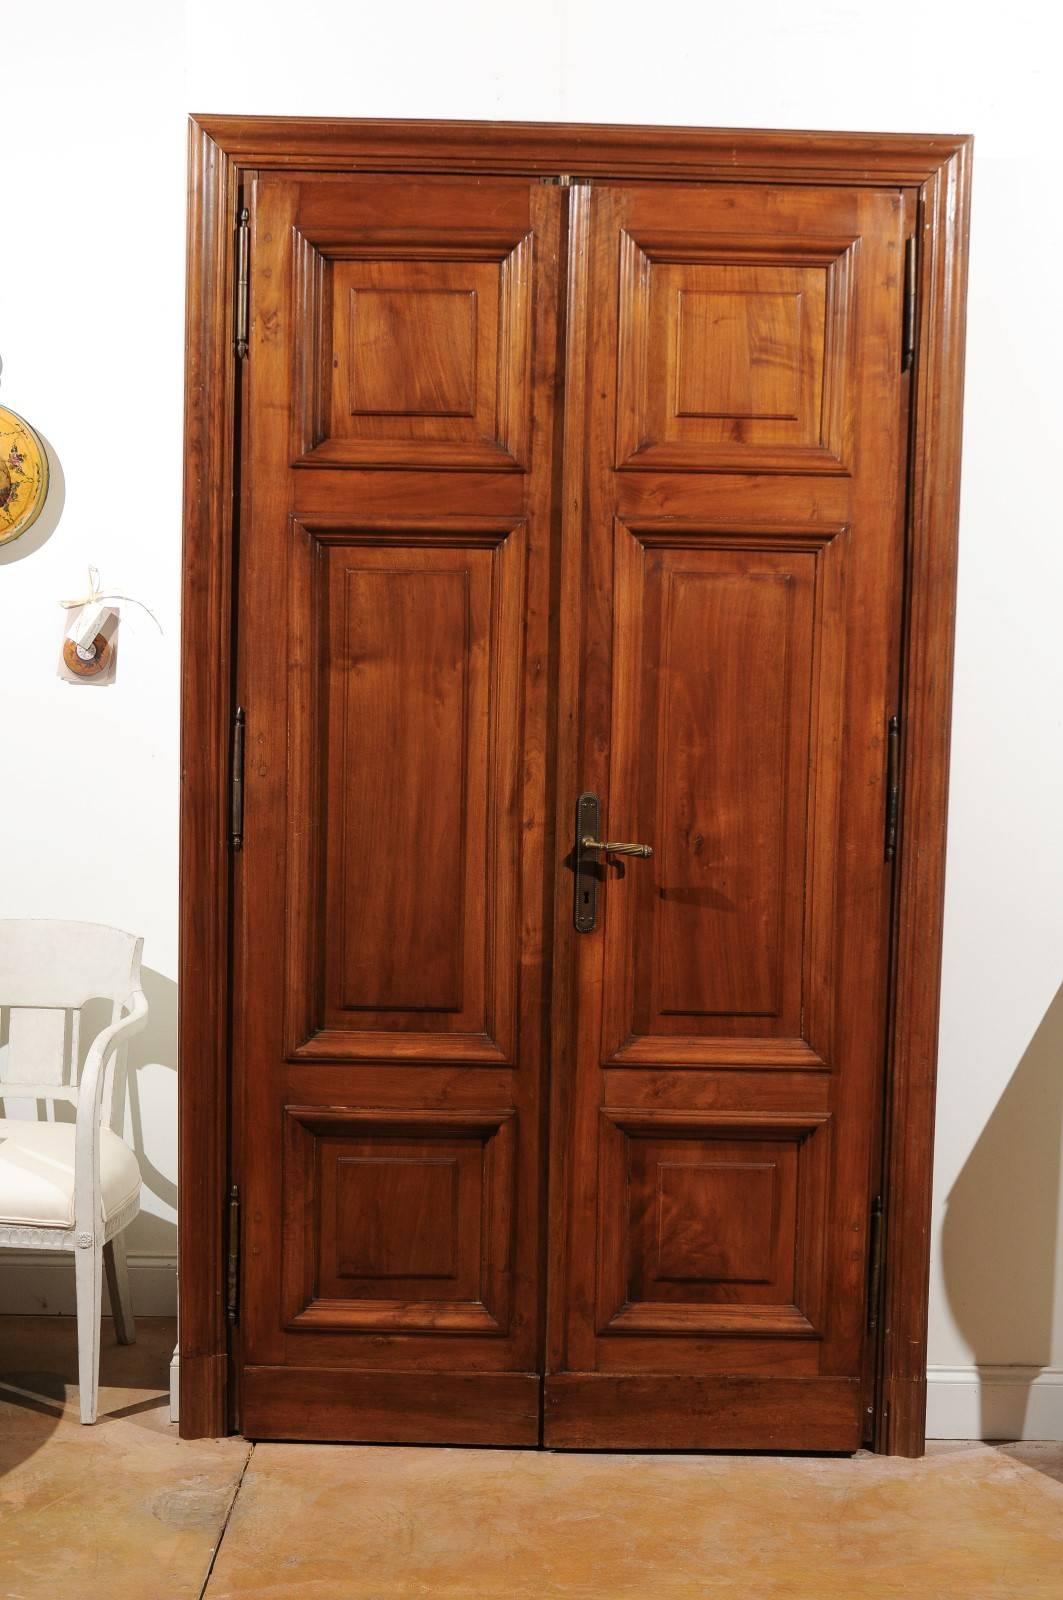 A pair of Italian walnut paneled double doors from the second half of the 19th century with original bronze hardware and keys and custom surround. Each of this pair of Italian double doors features some of the most beautiful European walnut we have